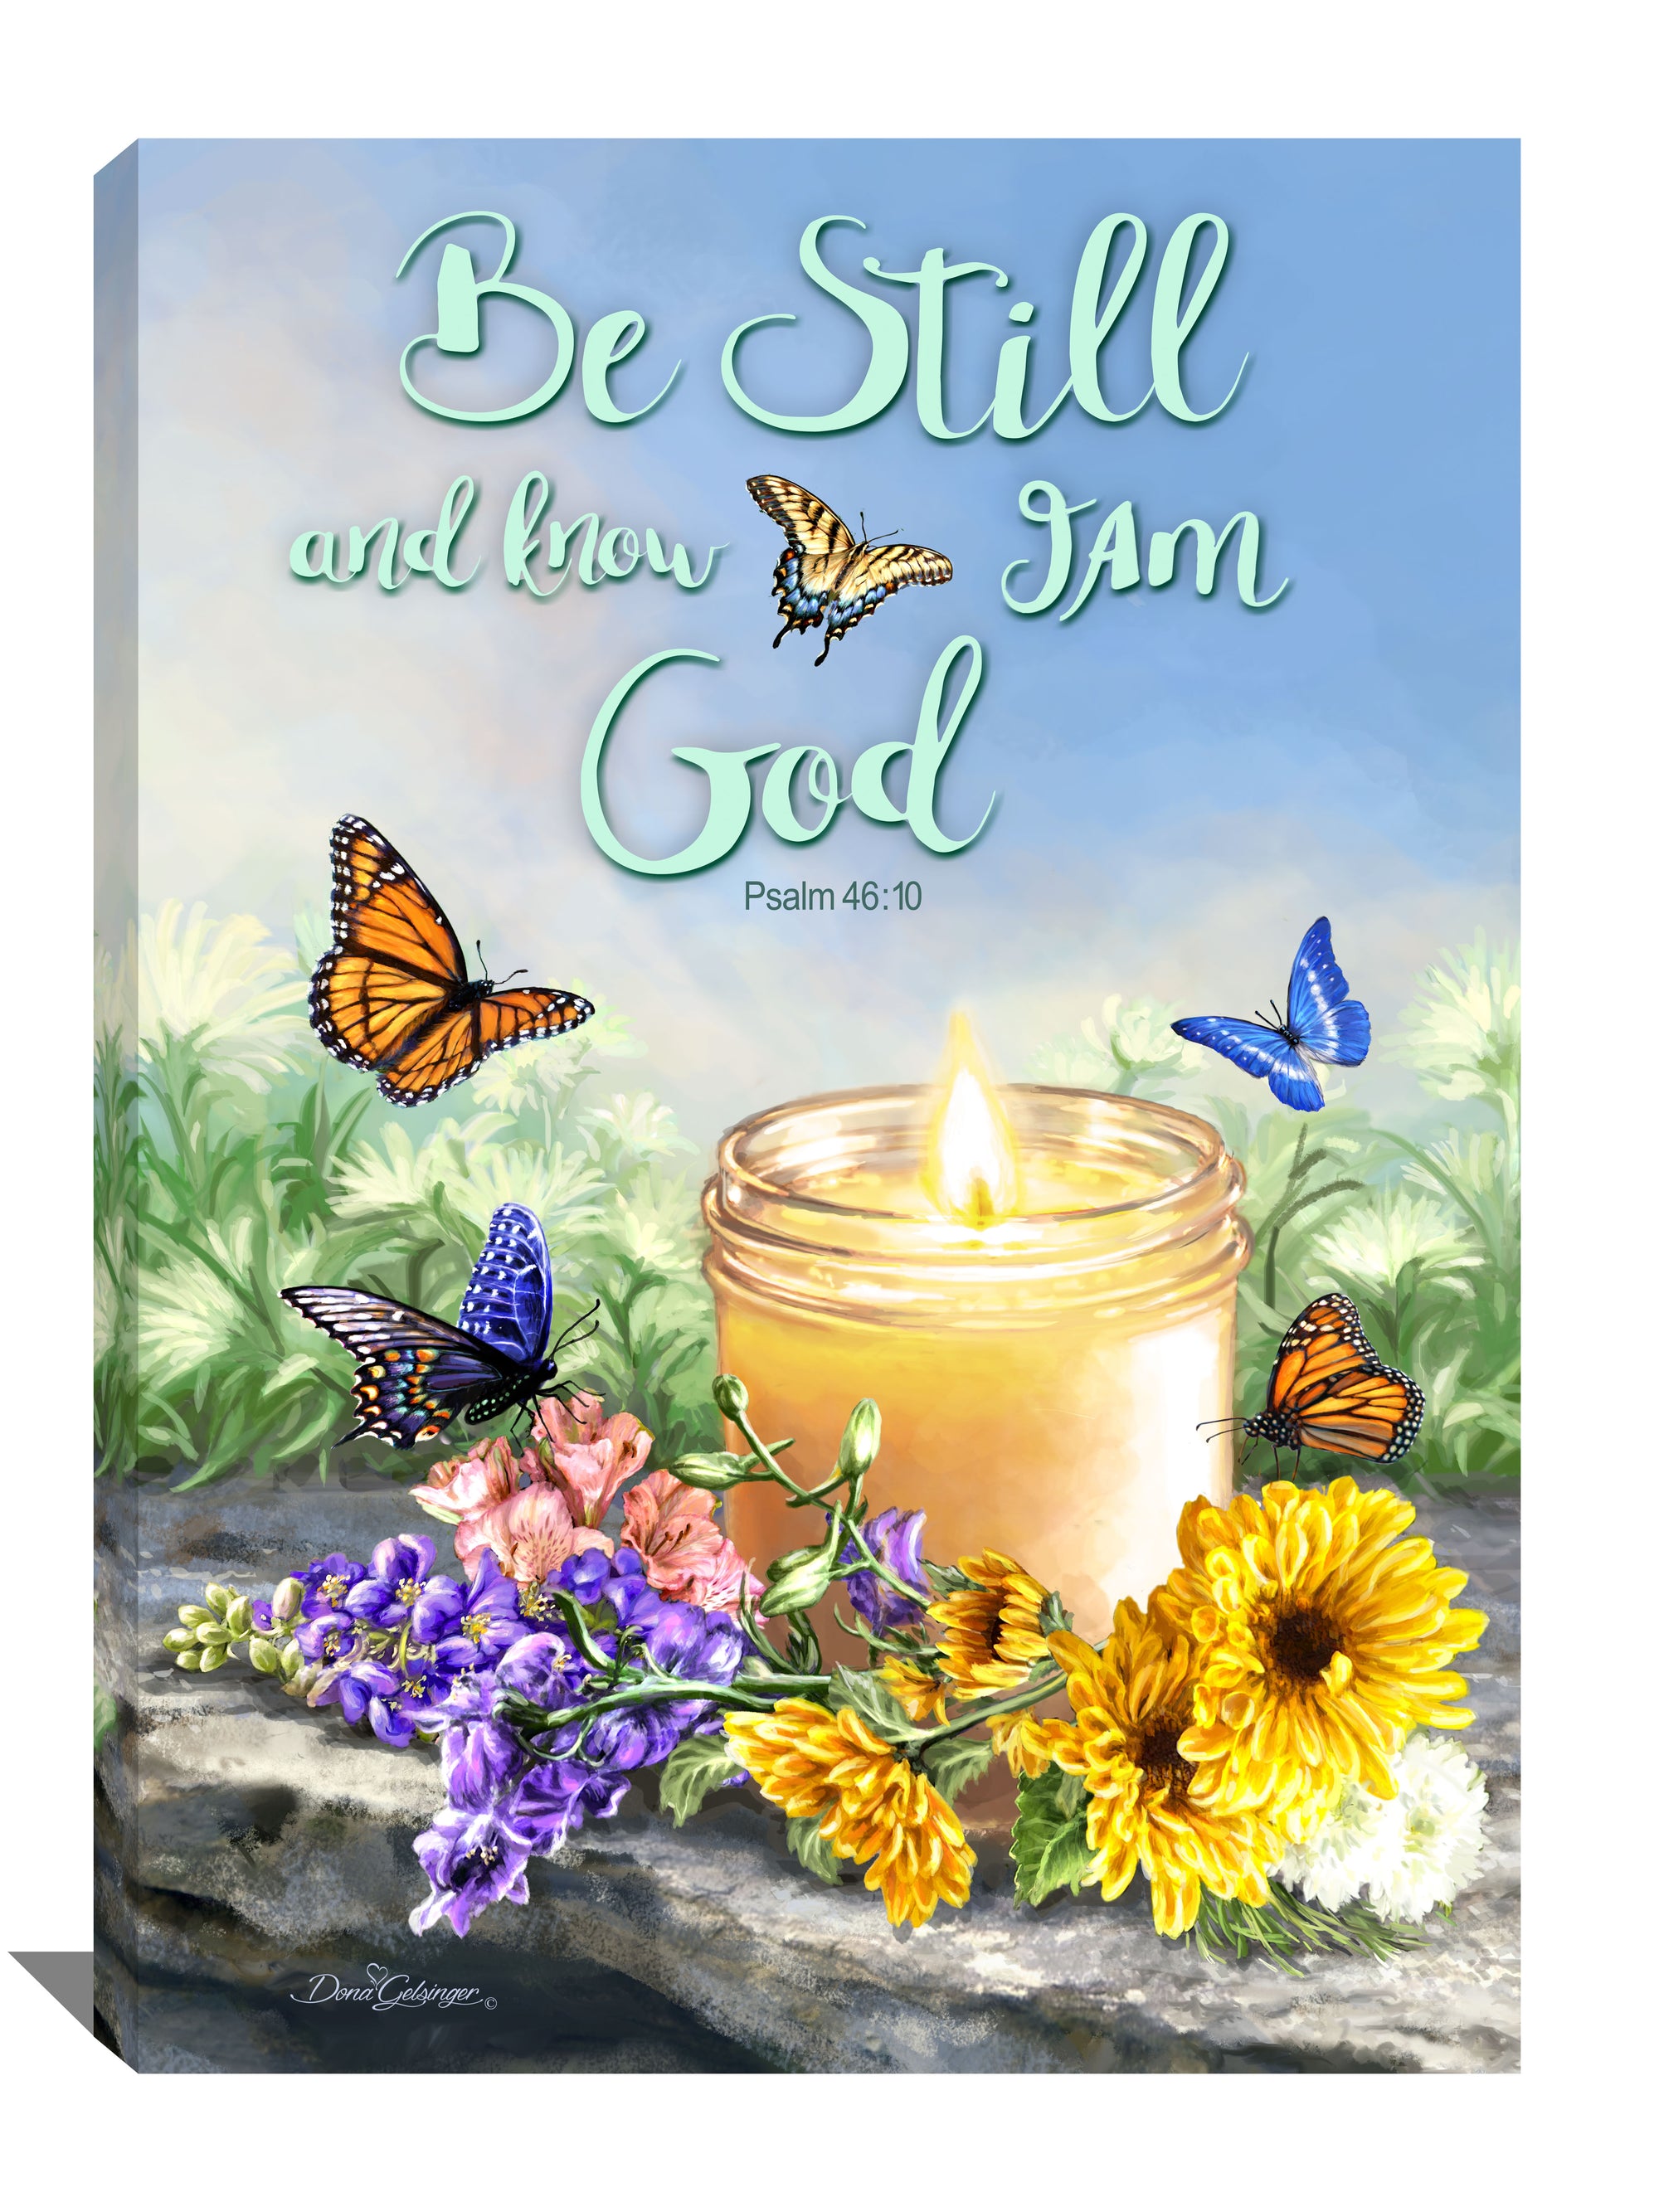  Be Still I am God Canvas Wall Art! Featuring a beautiful candle surrounded by colorful flowers and playful butterflies